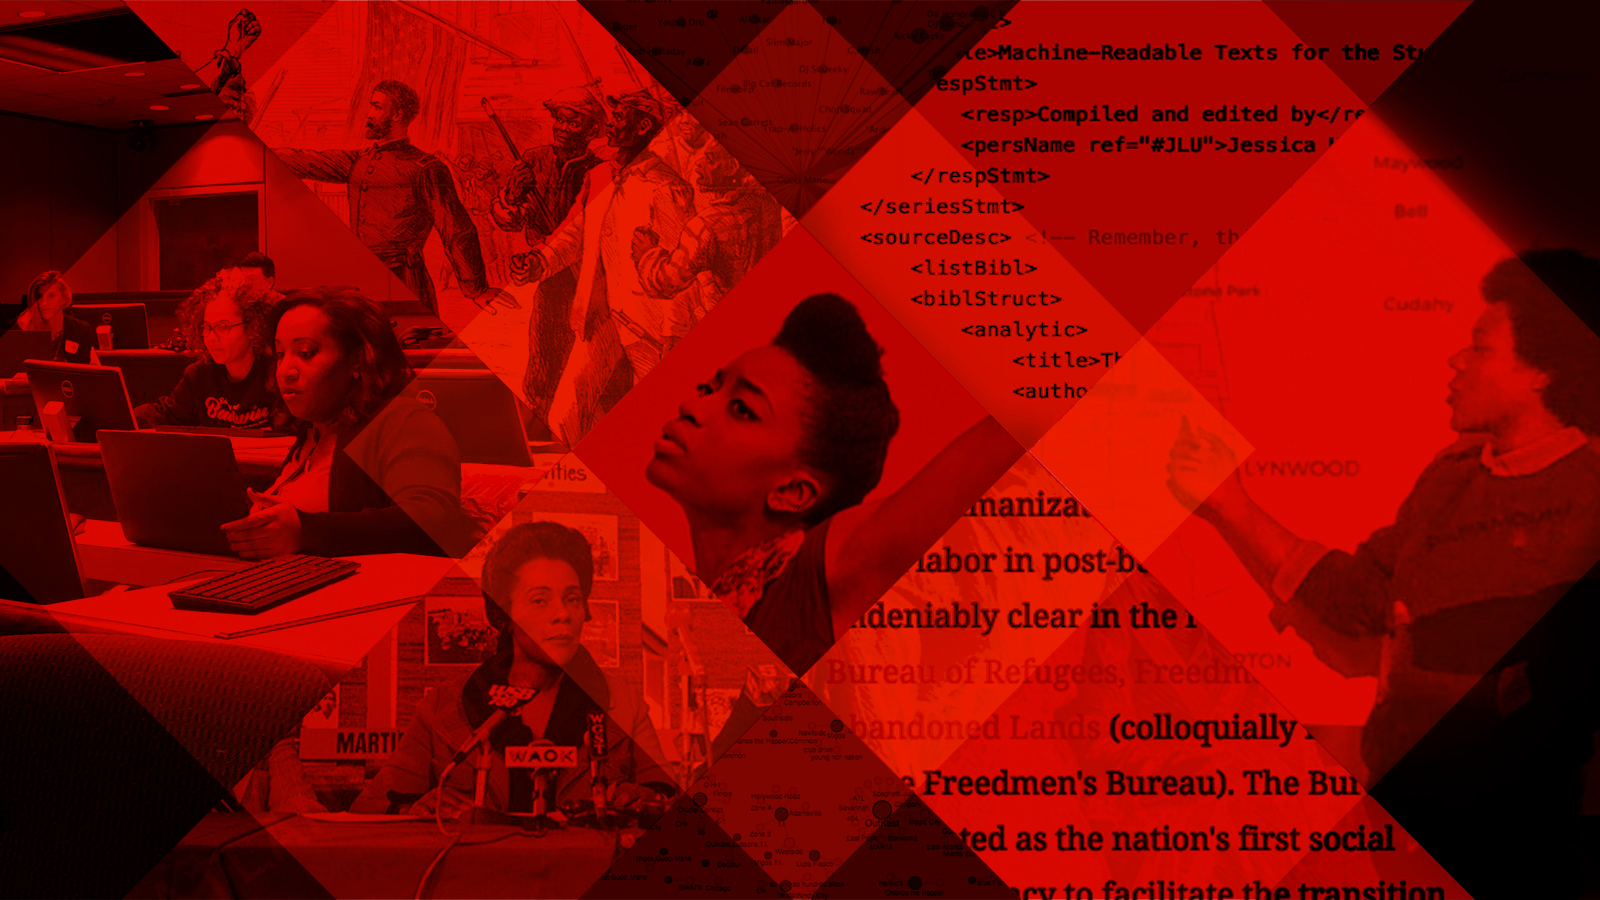 Geometric collage in red and black featuring images of important people in African American history and culture